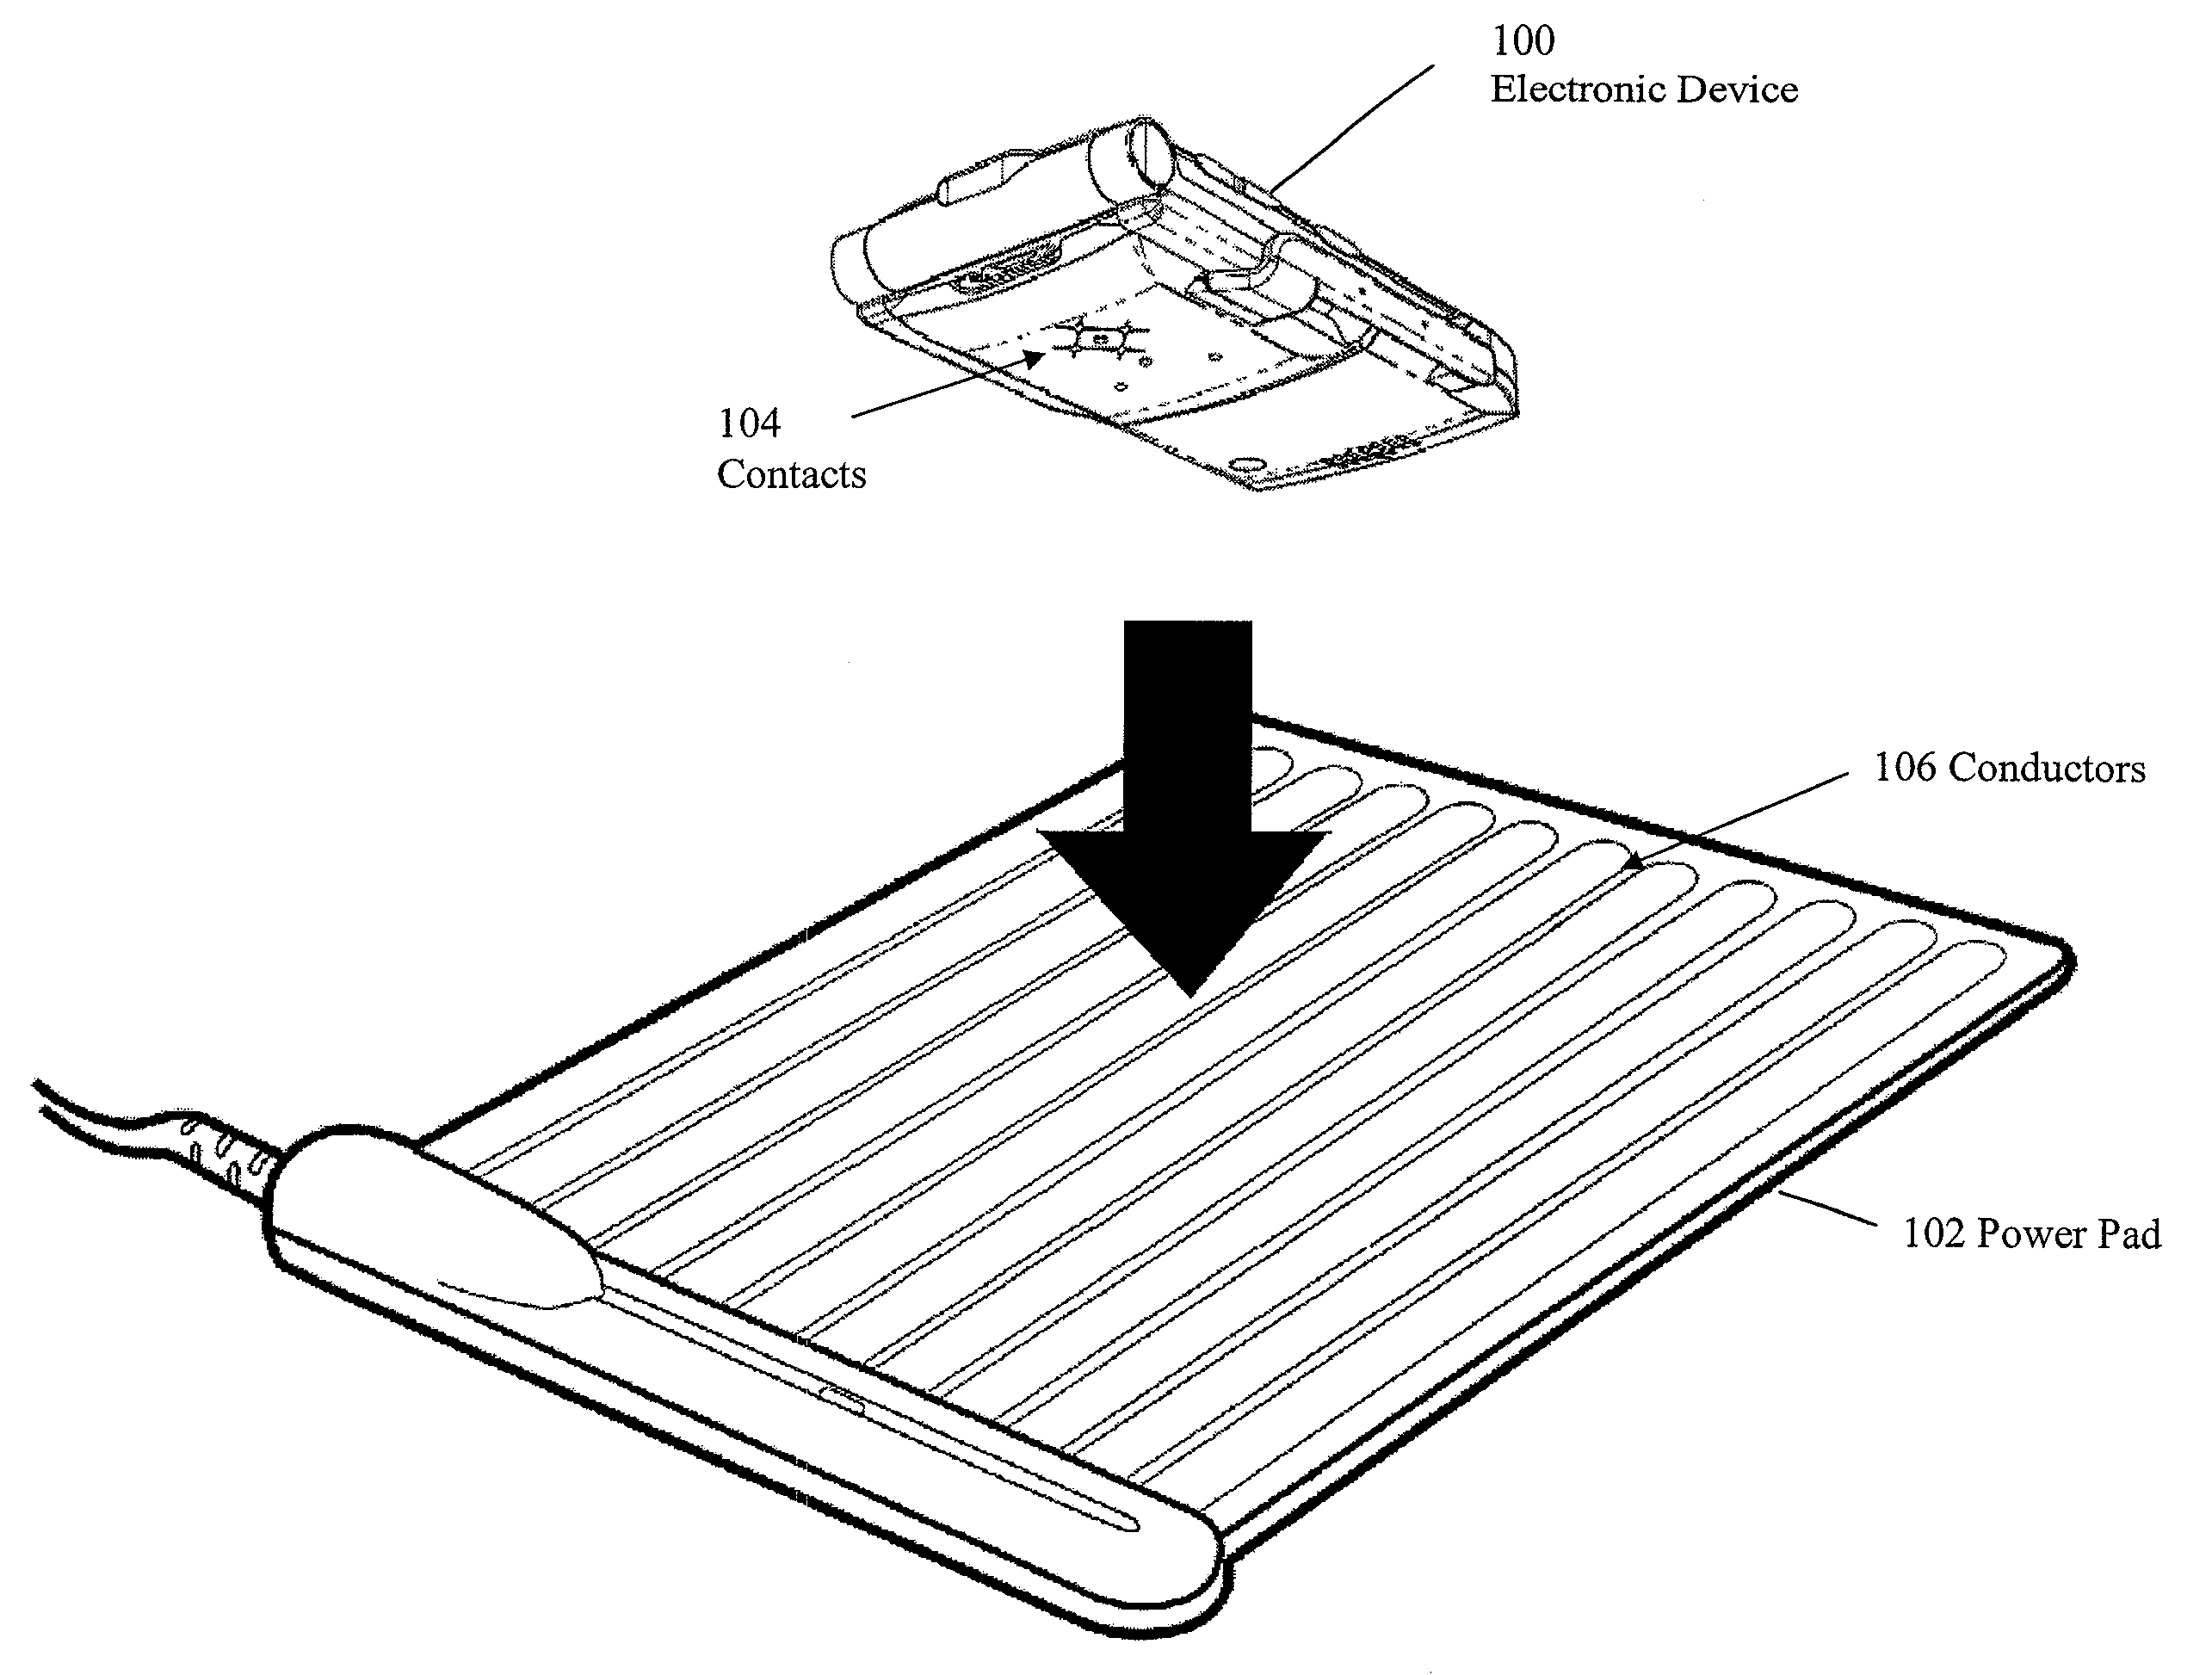 Protection of exposed contacts connected to a bridge rectifier against electrostatic discharge